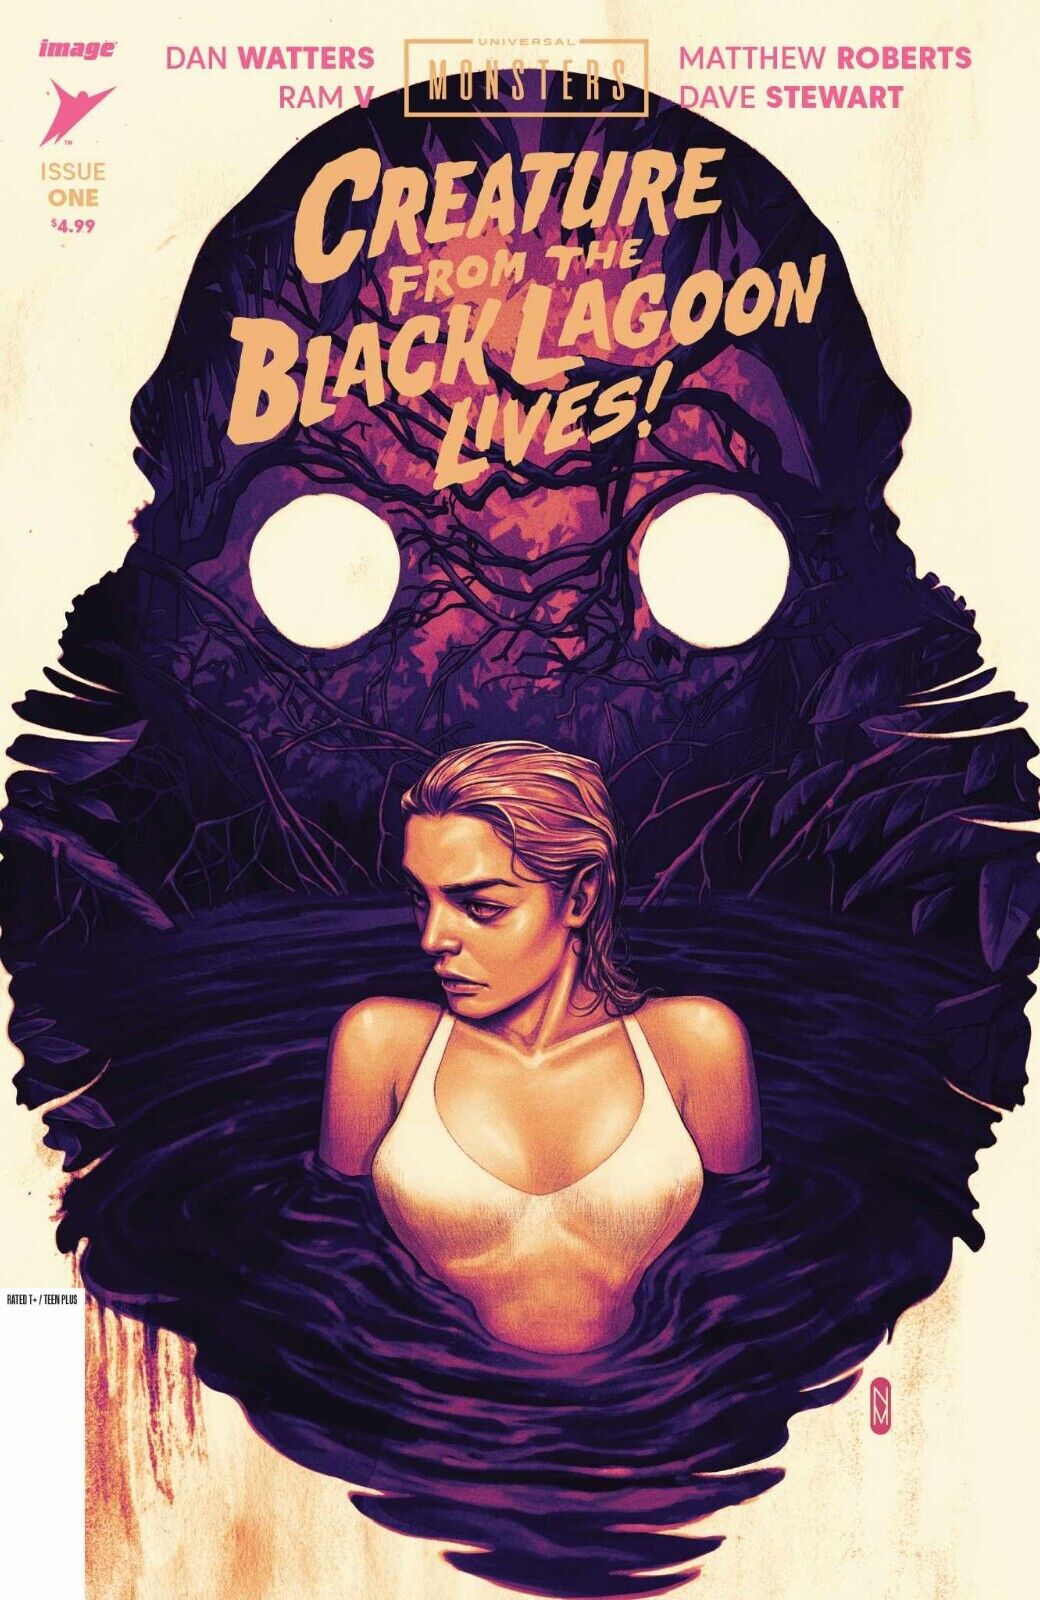 CREATURE FROM THE BLACK LAGOON LIVES #1 MALAVIA EXCLUSIVE VARIANT LE 750 PRESALE